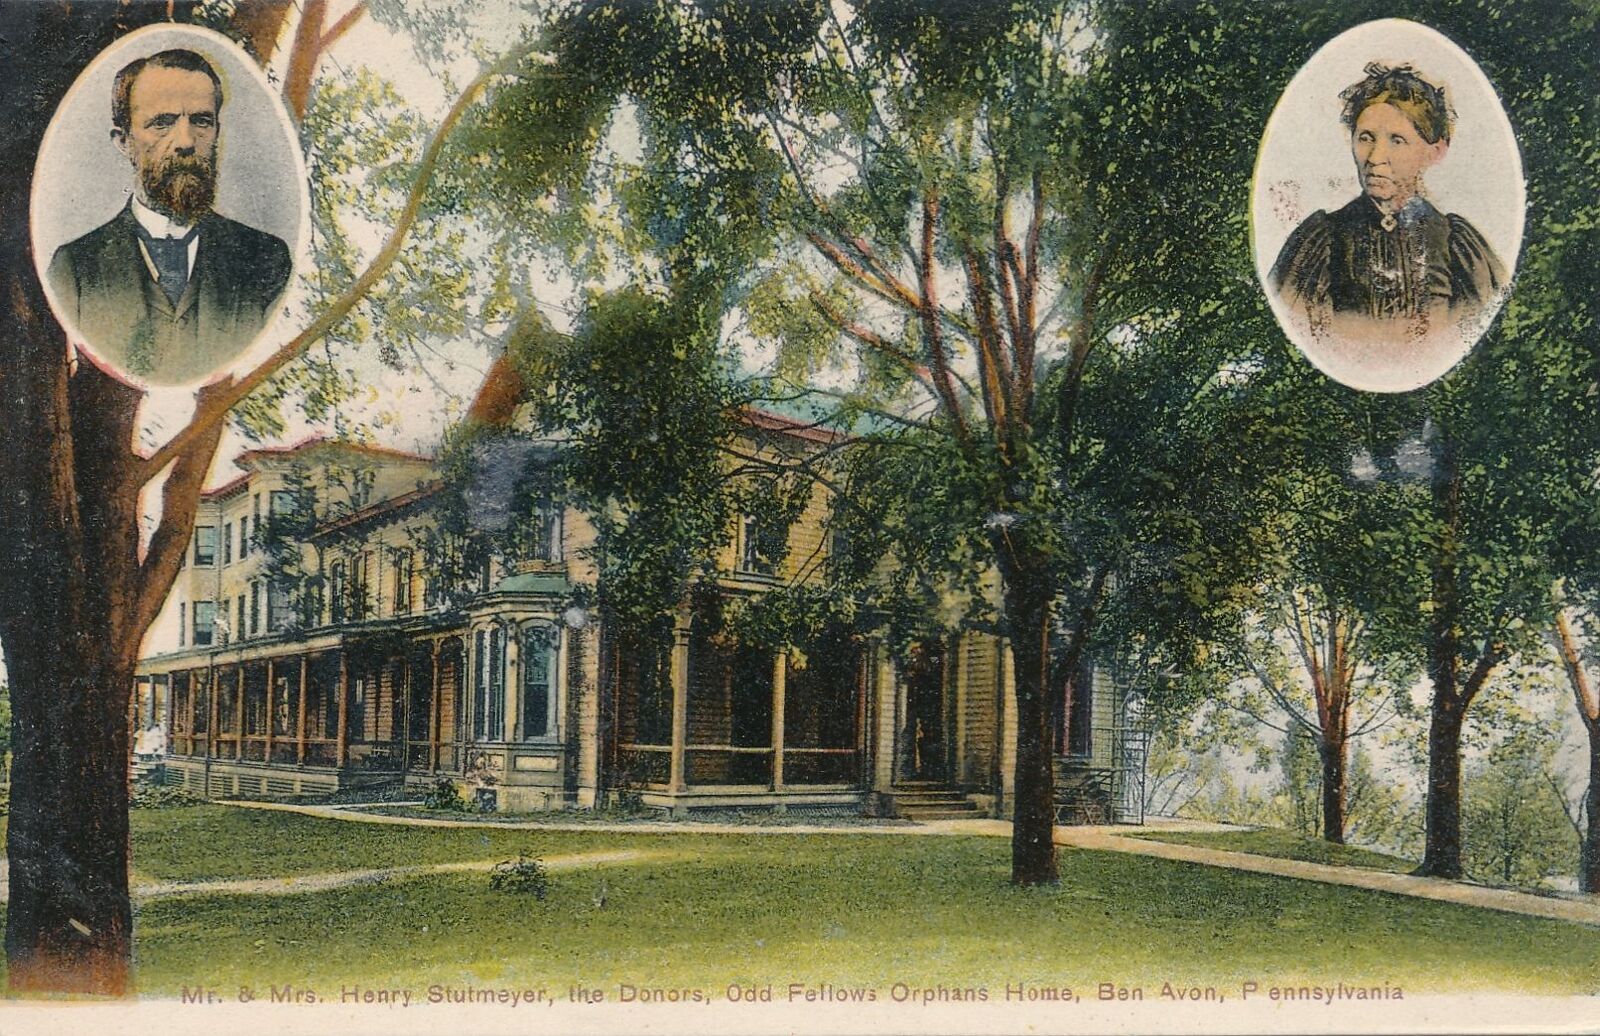 BEN AVON PA - Odd Fellows Orphans Home showing Donors The Stutmeyers Postcard